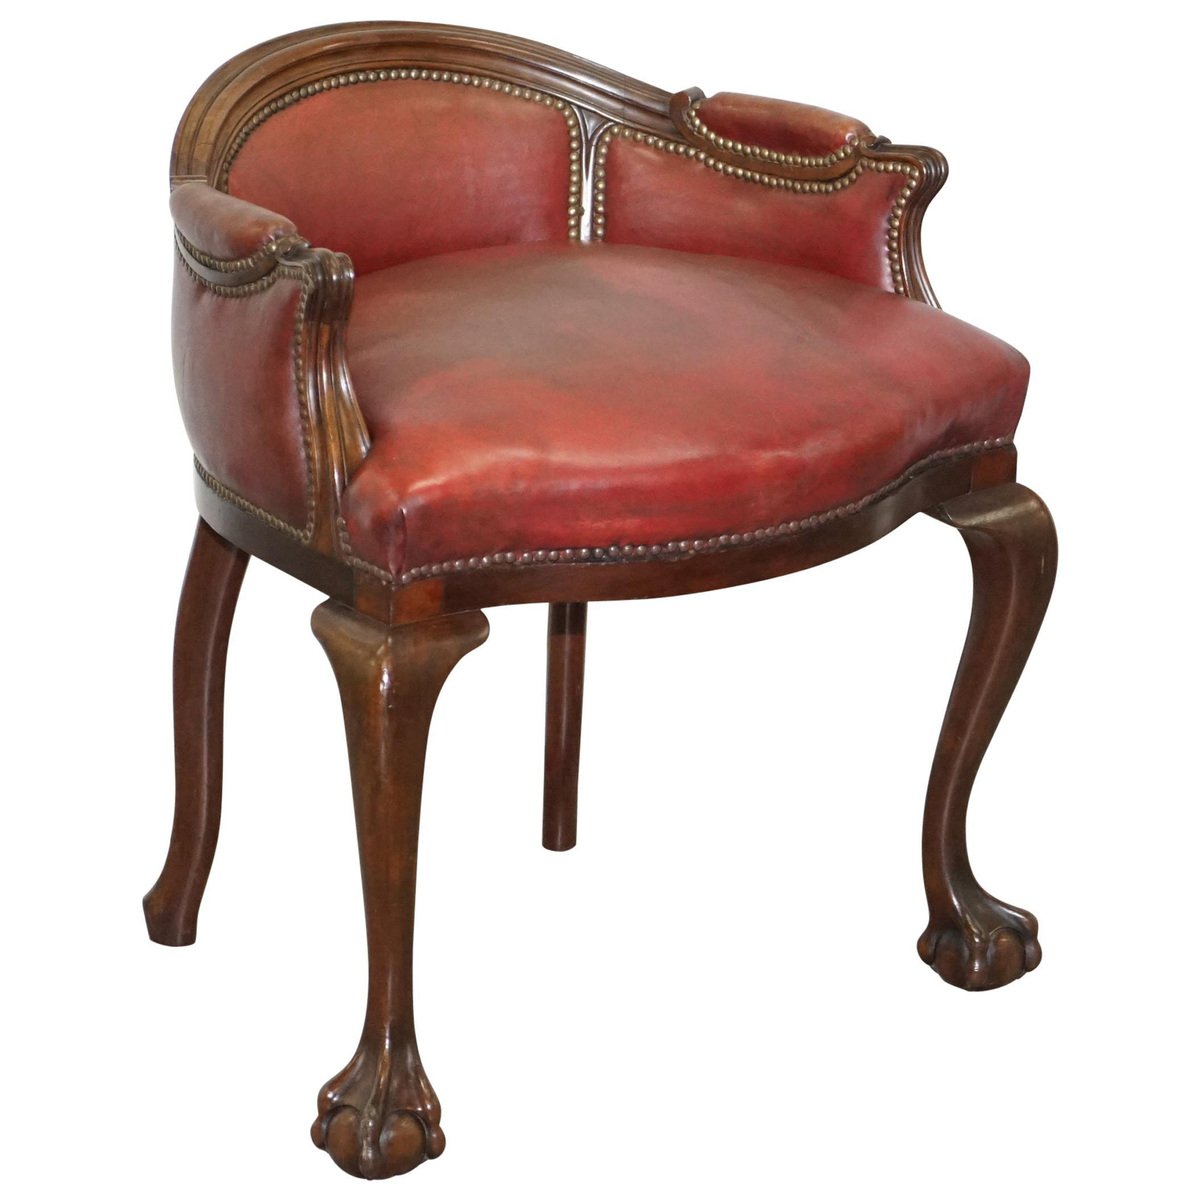 small oxblood leather claw ball cabriolet leg chair or desk stool GZP-1006546